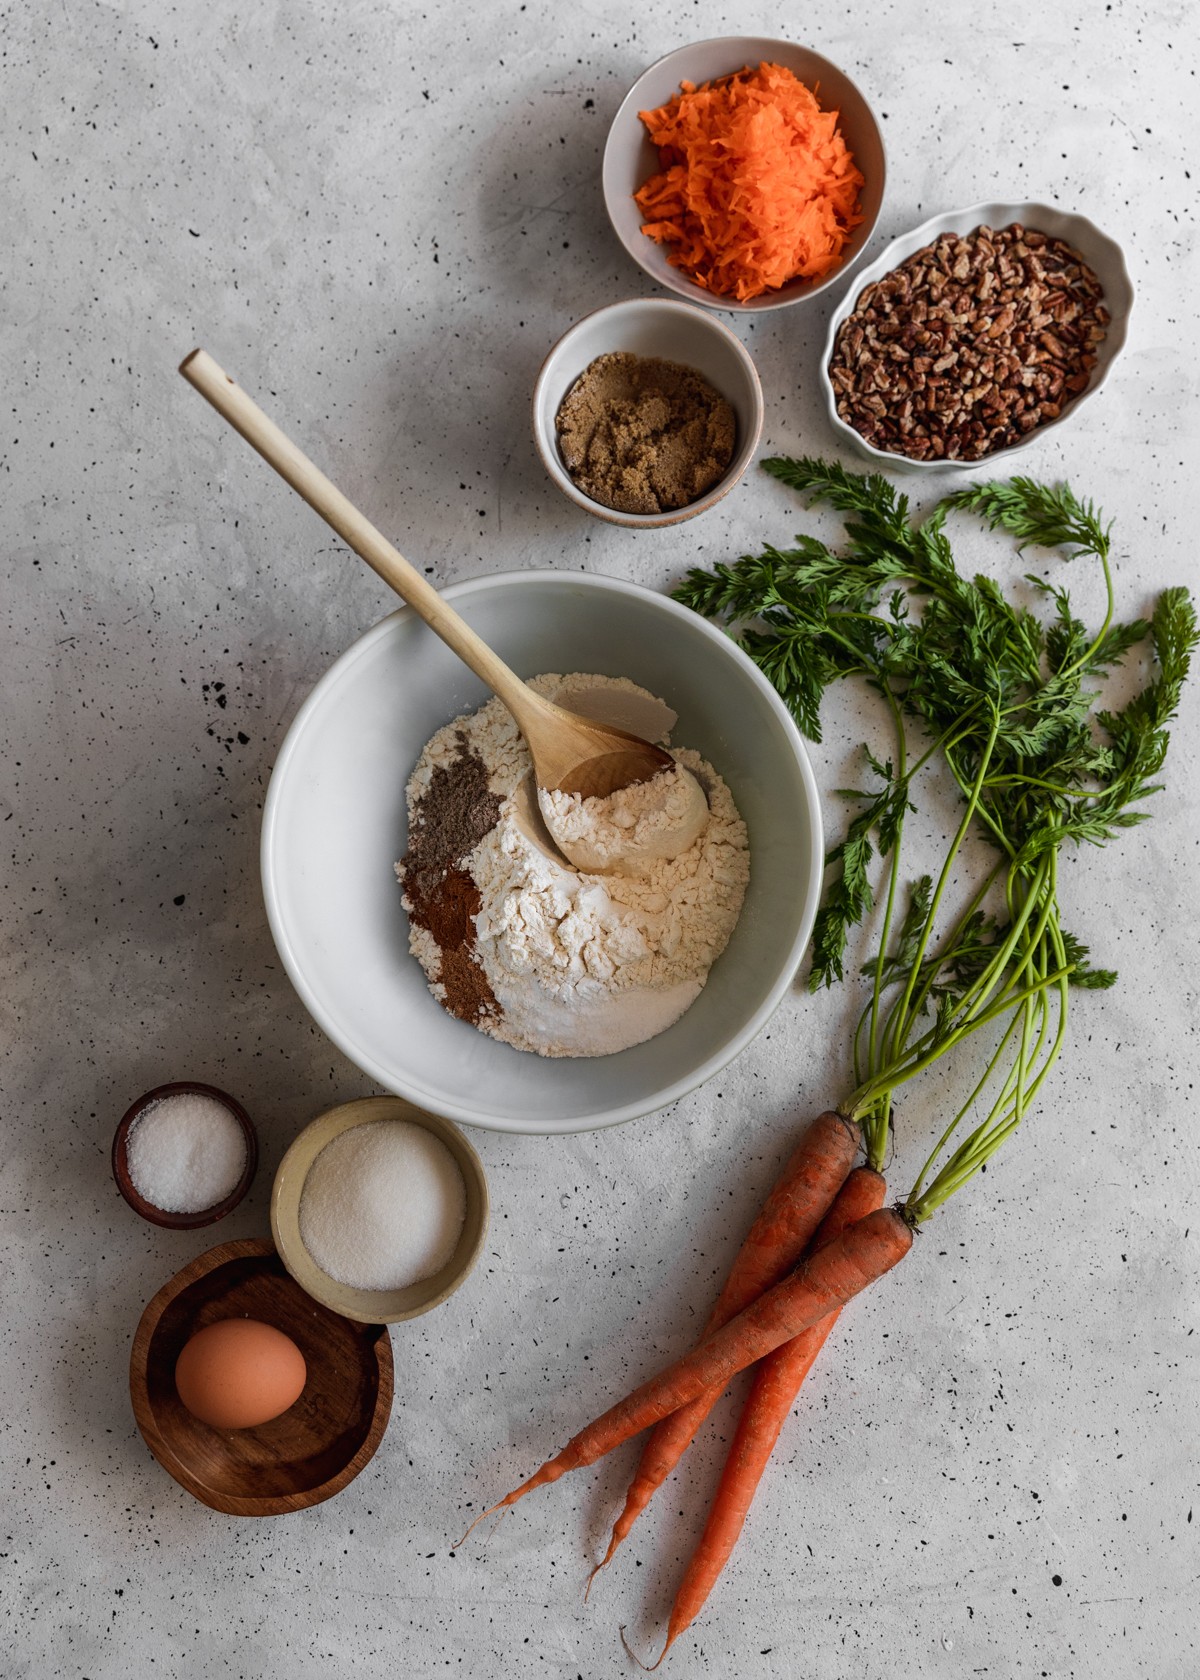 Ingredients for carrot cake donuts, including sugar, pecans, carrots, and dry goods in white and beige bowls on a grey counter.